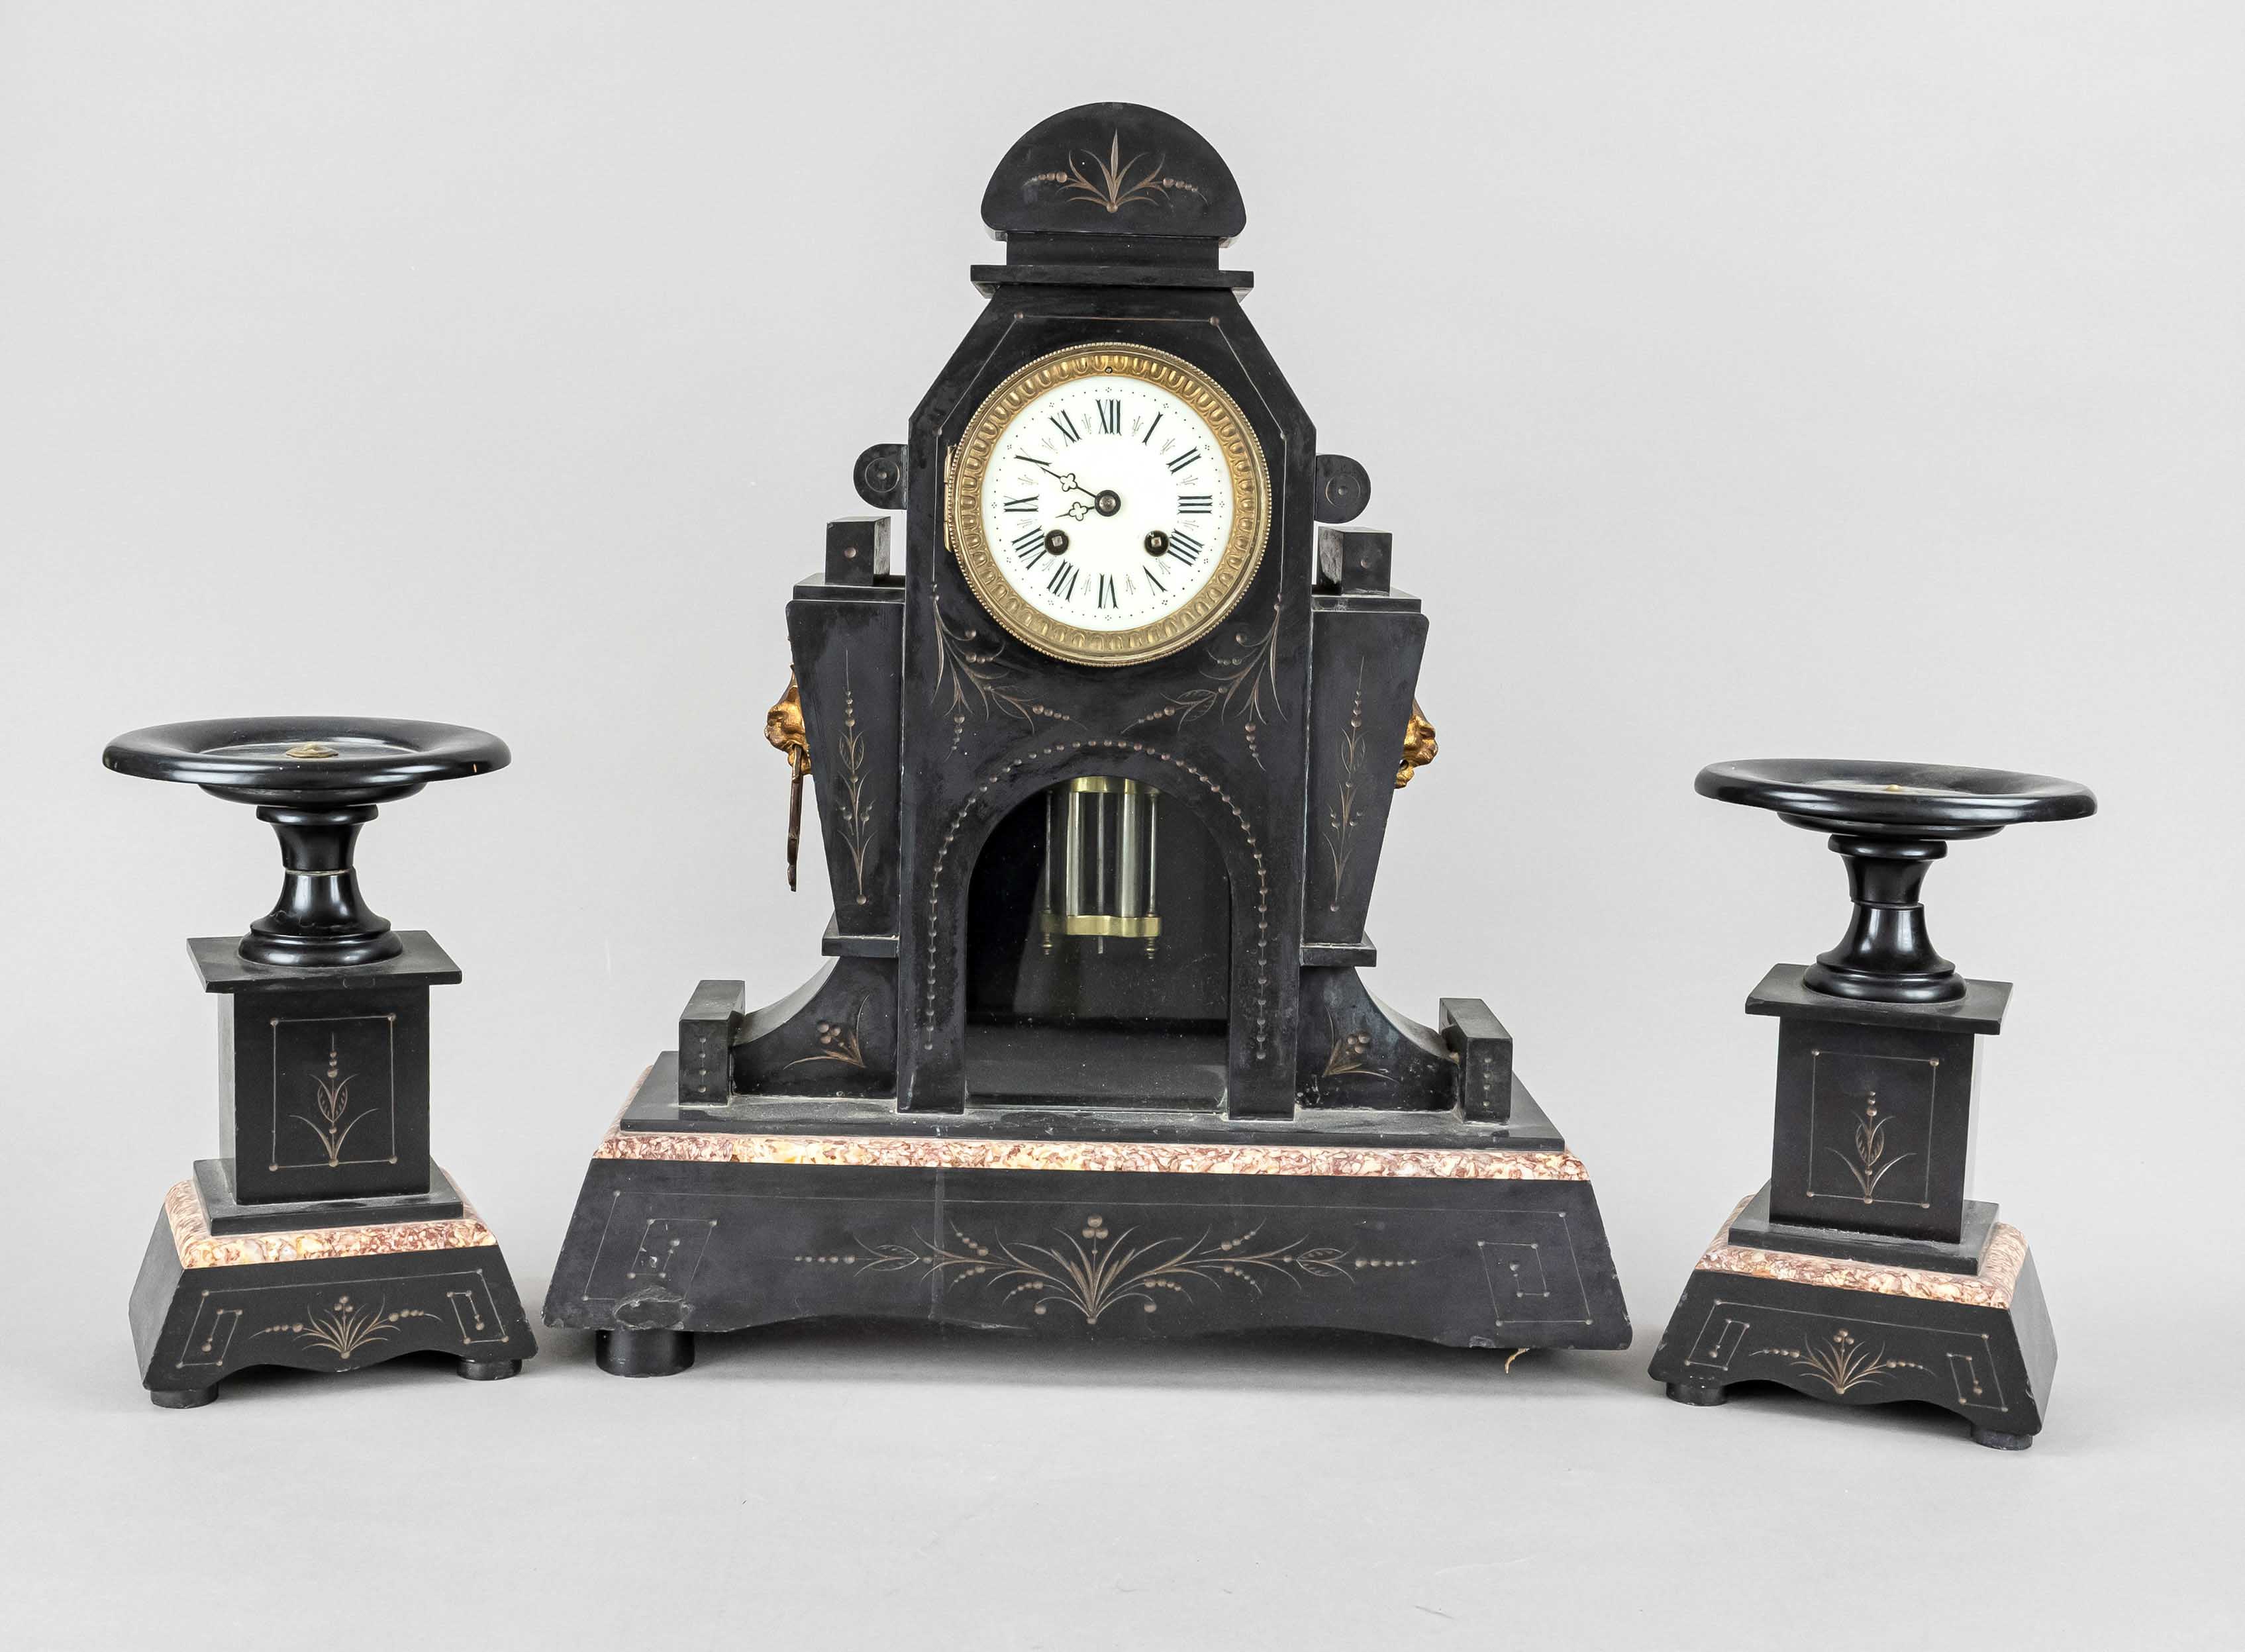 3-piece marble clock set, 2nd h.19th c., black marble red/brown trimmed, with gilded incised